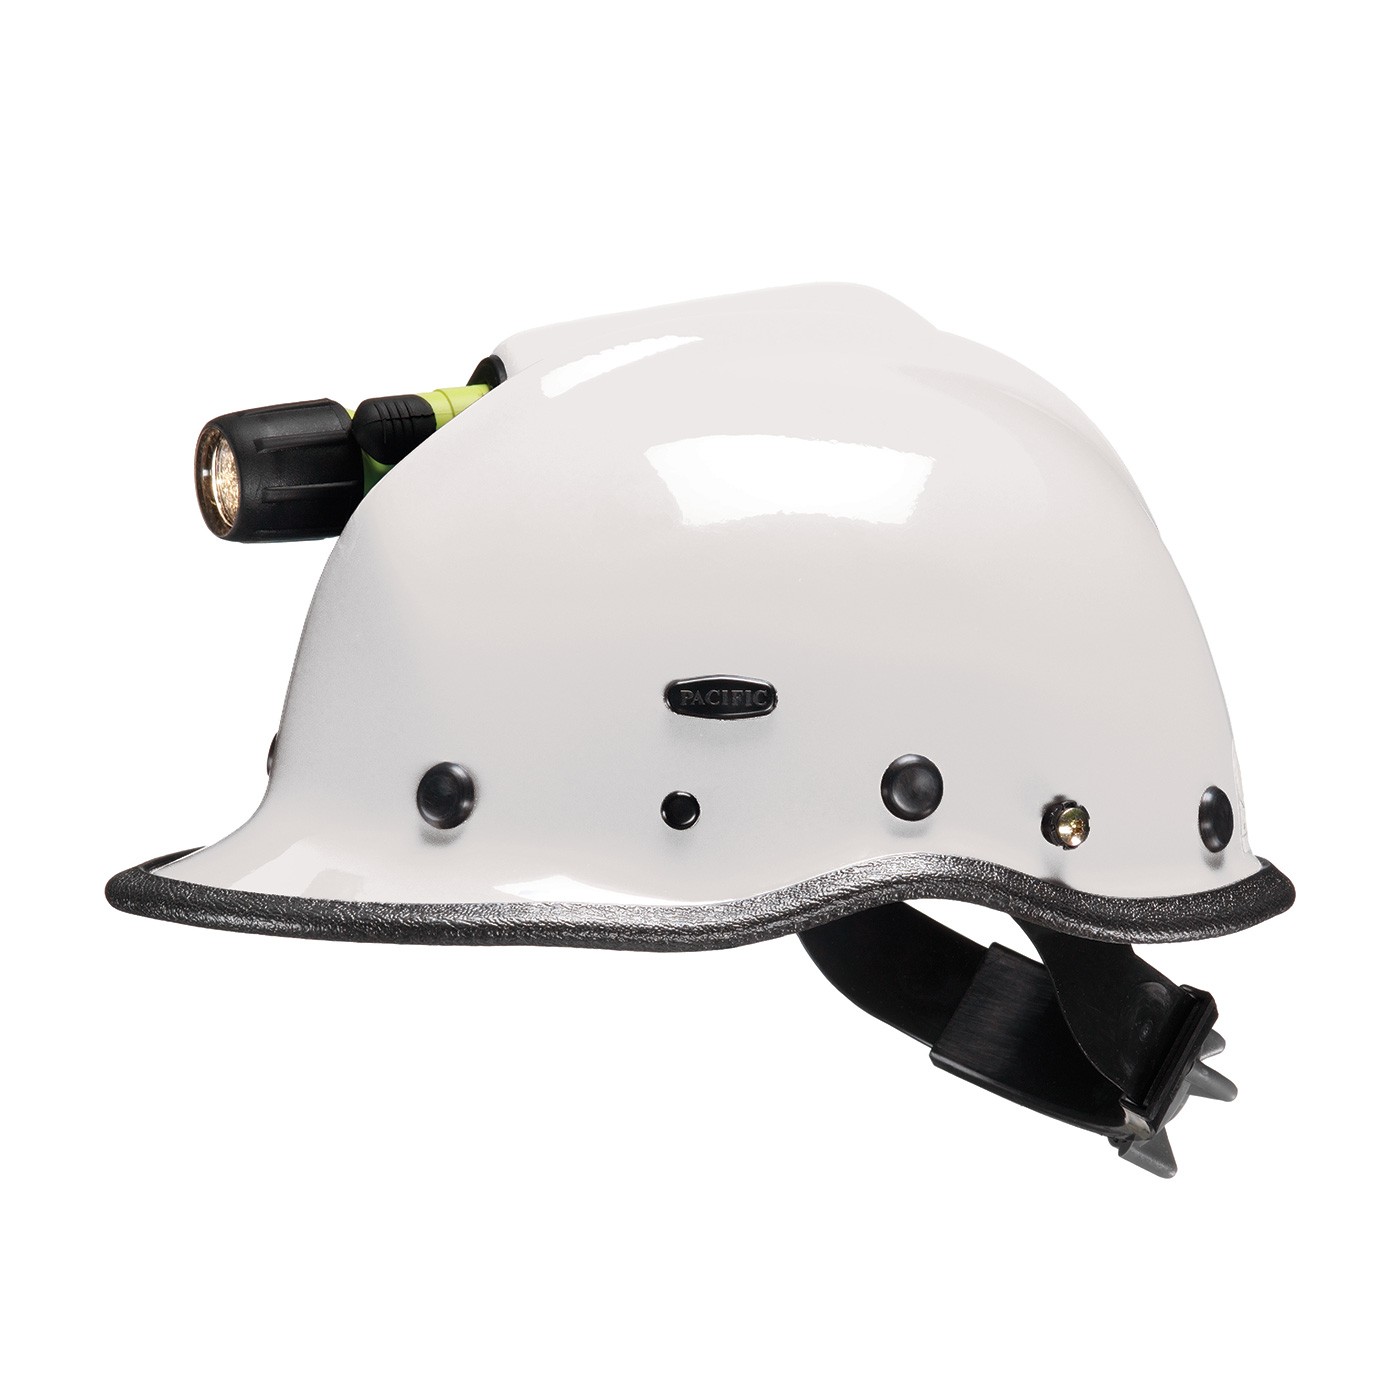 R5T™ Rescue Helmet with ESS Goggle Mounts and Built-in Light Holder  (#860-60XX)